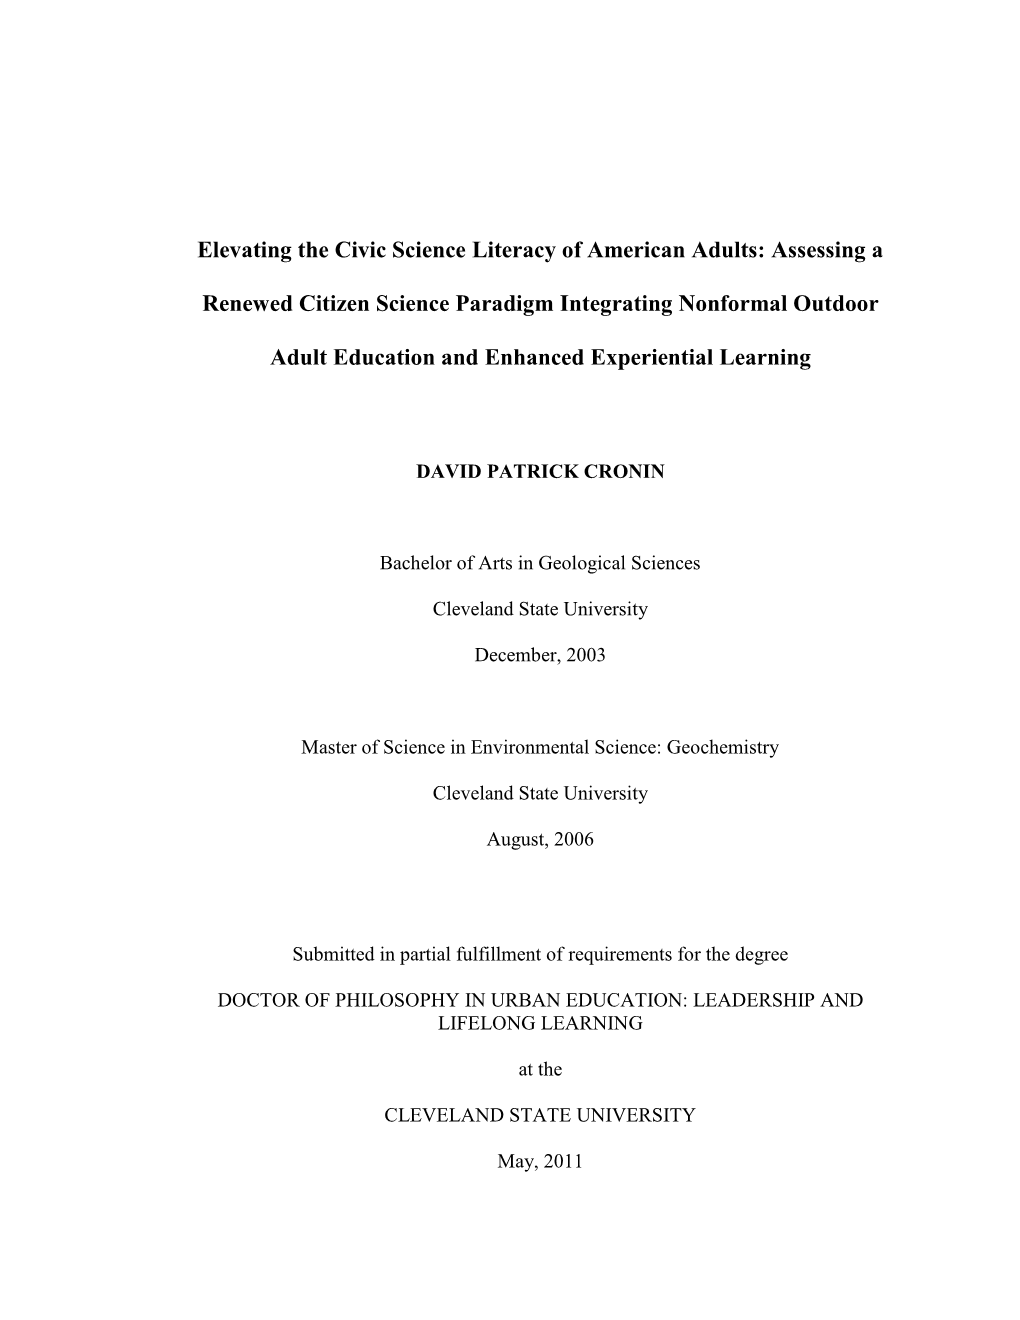 Science Literacy of American Adults: Assessing A